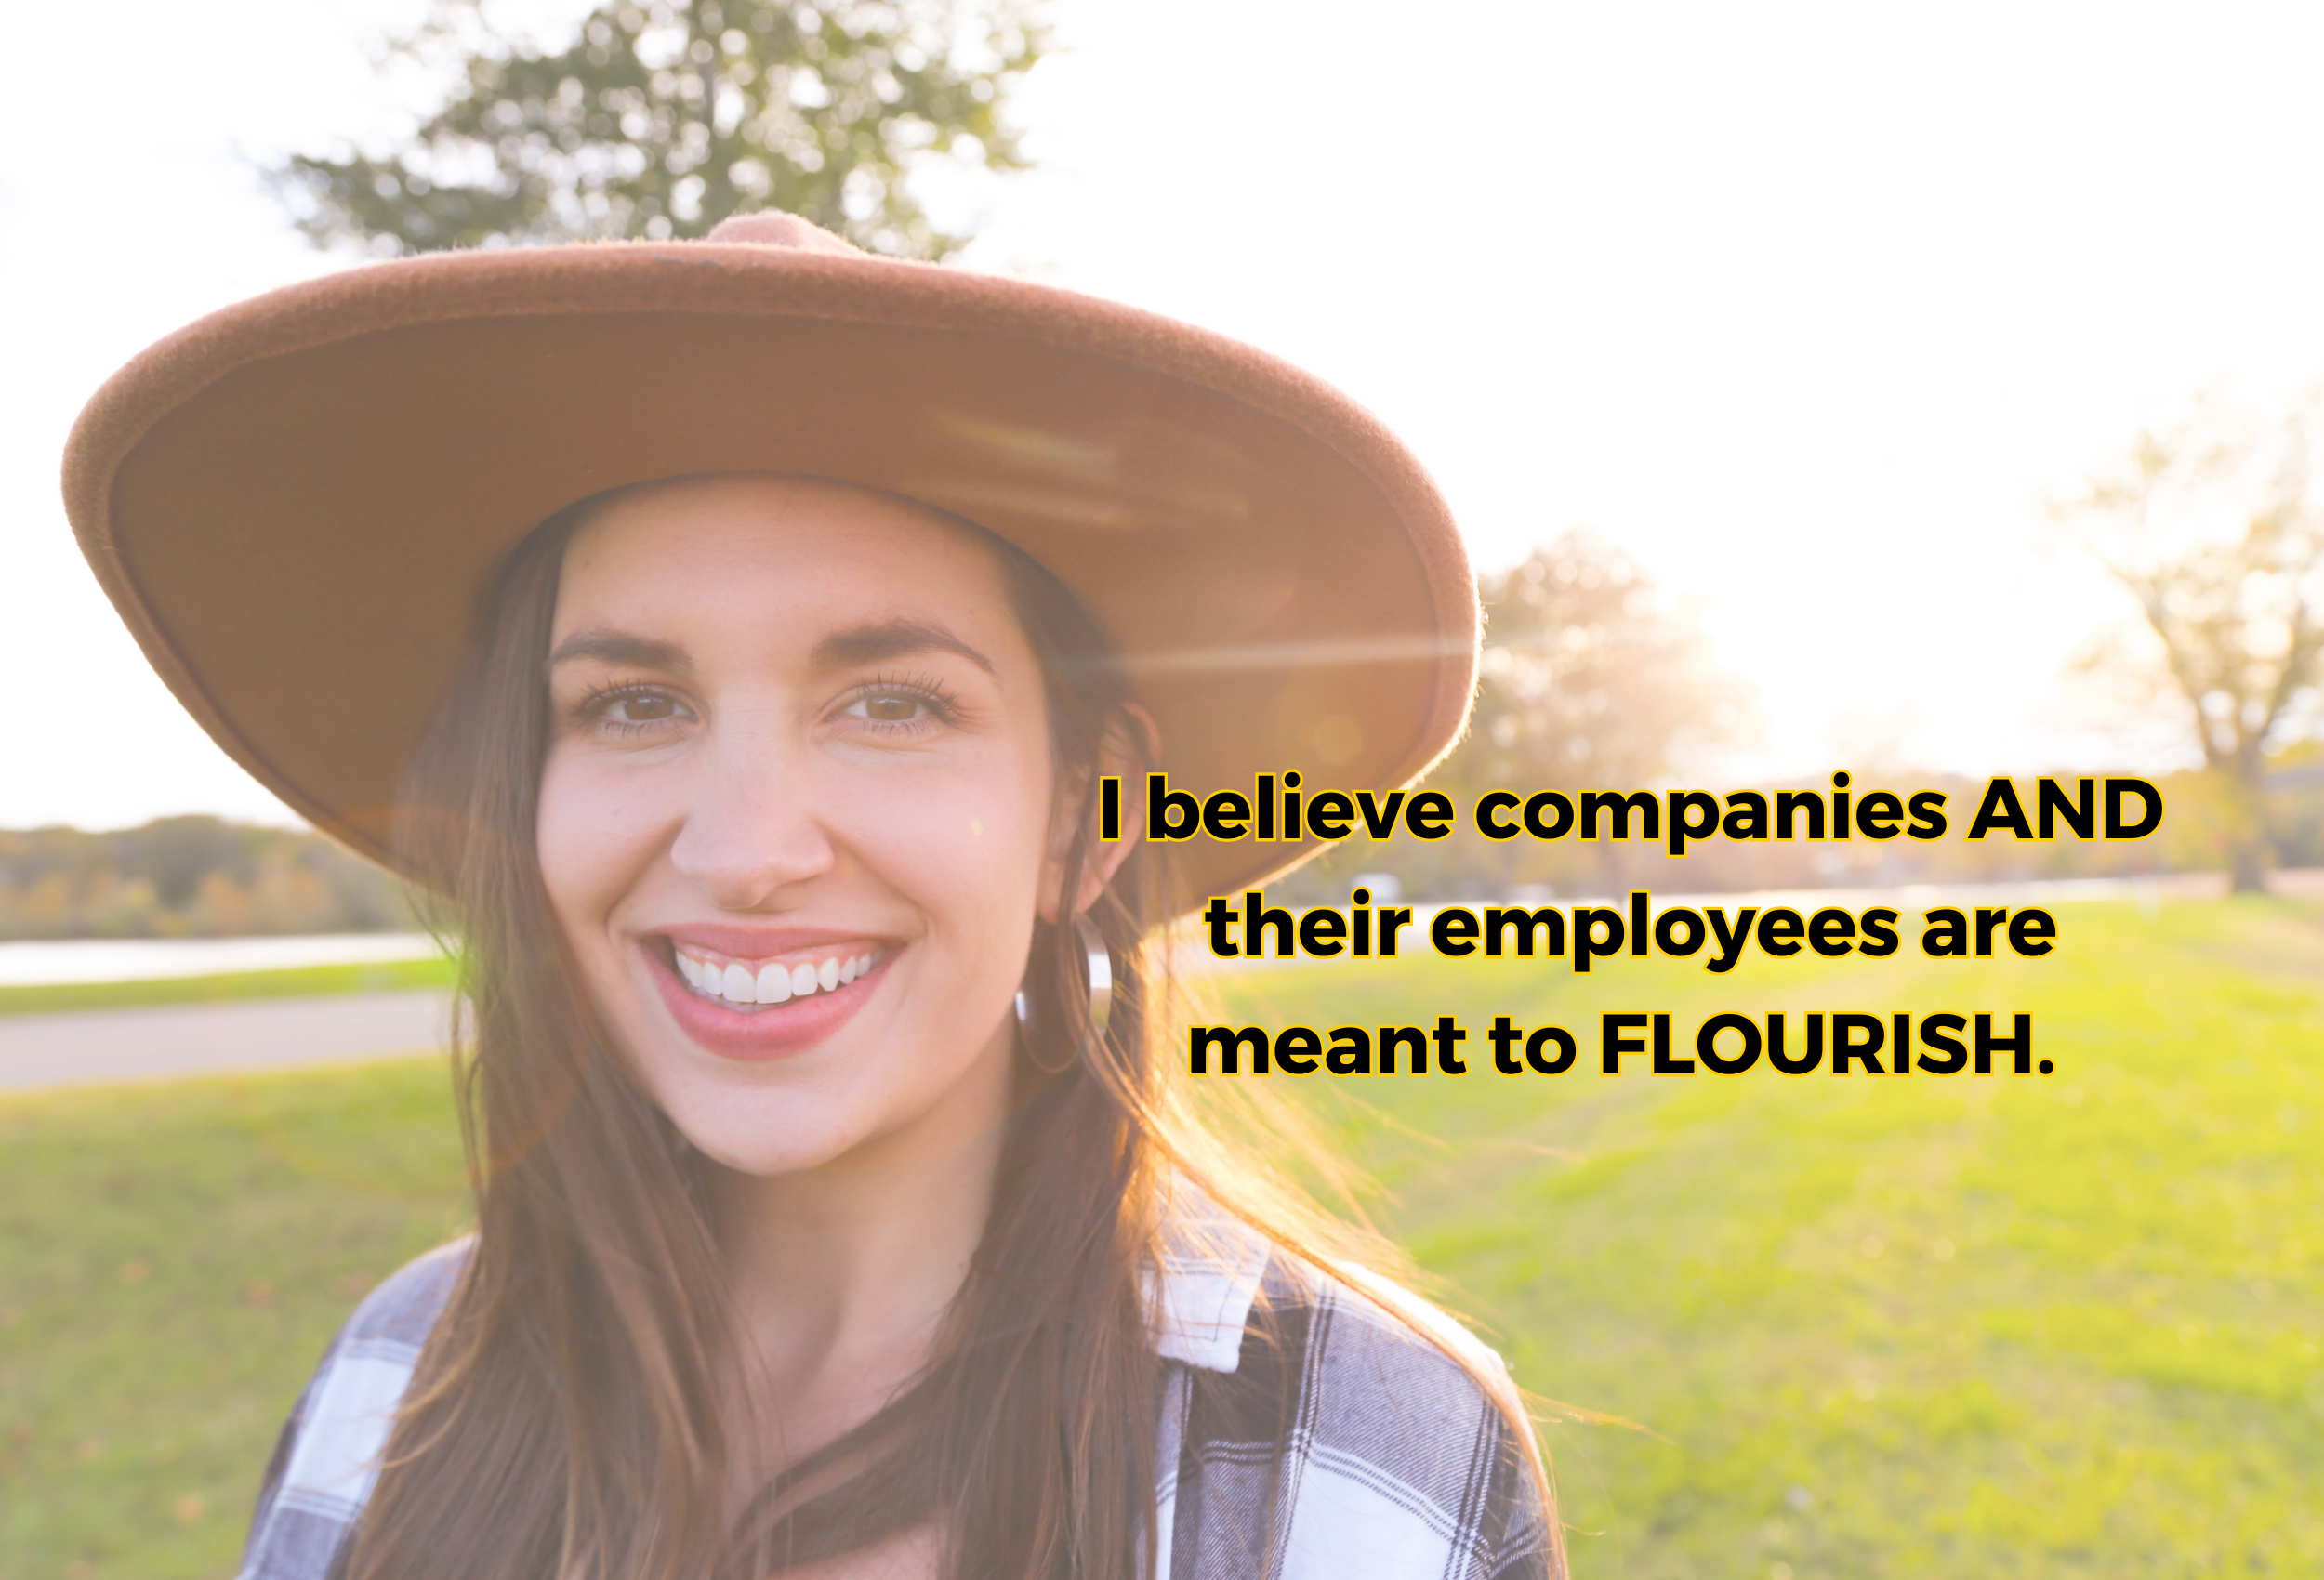 I believe companies AND their employees are meant to flourish.